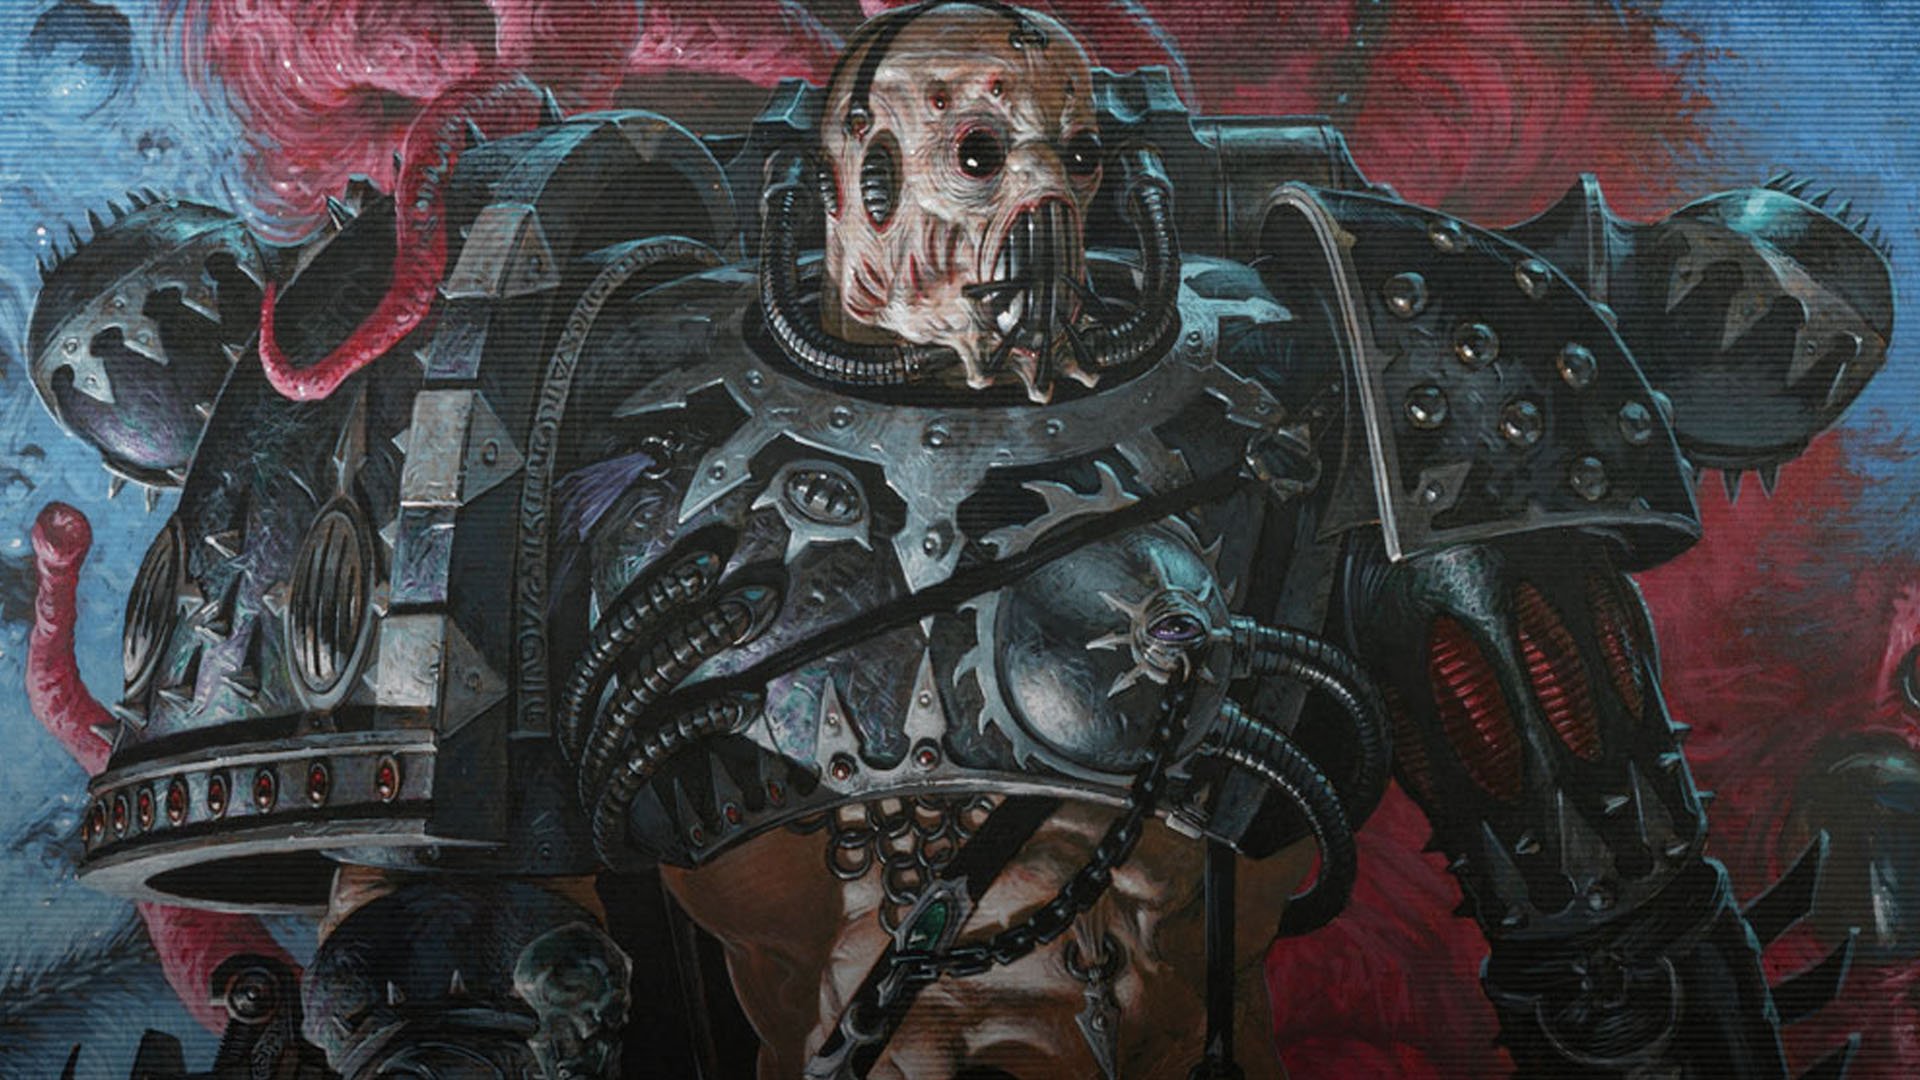 Warhammer 40k Fulgrim guide - Games Workshop image showing a corrupted Slaanesh Chaos Space Marine of the Emperor's Children Legion